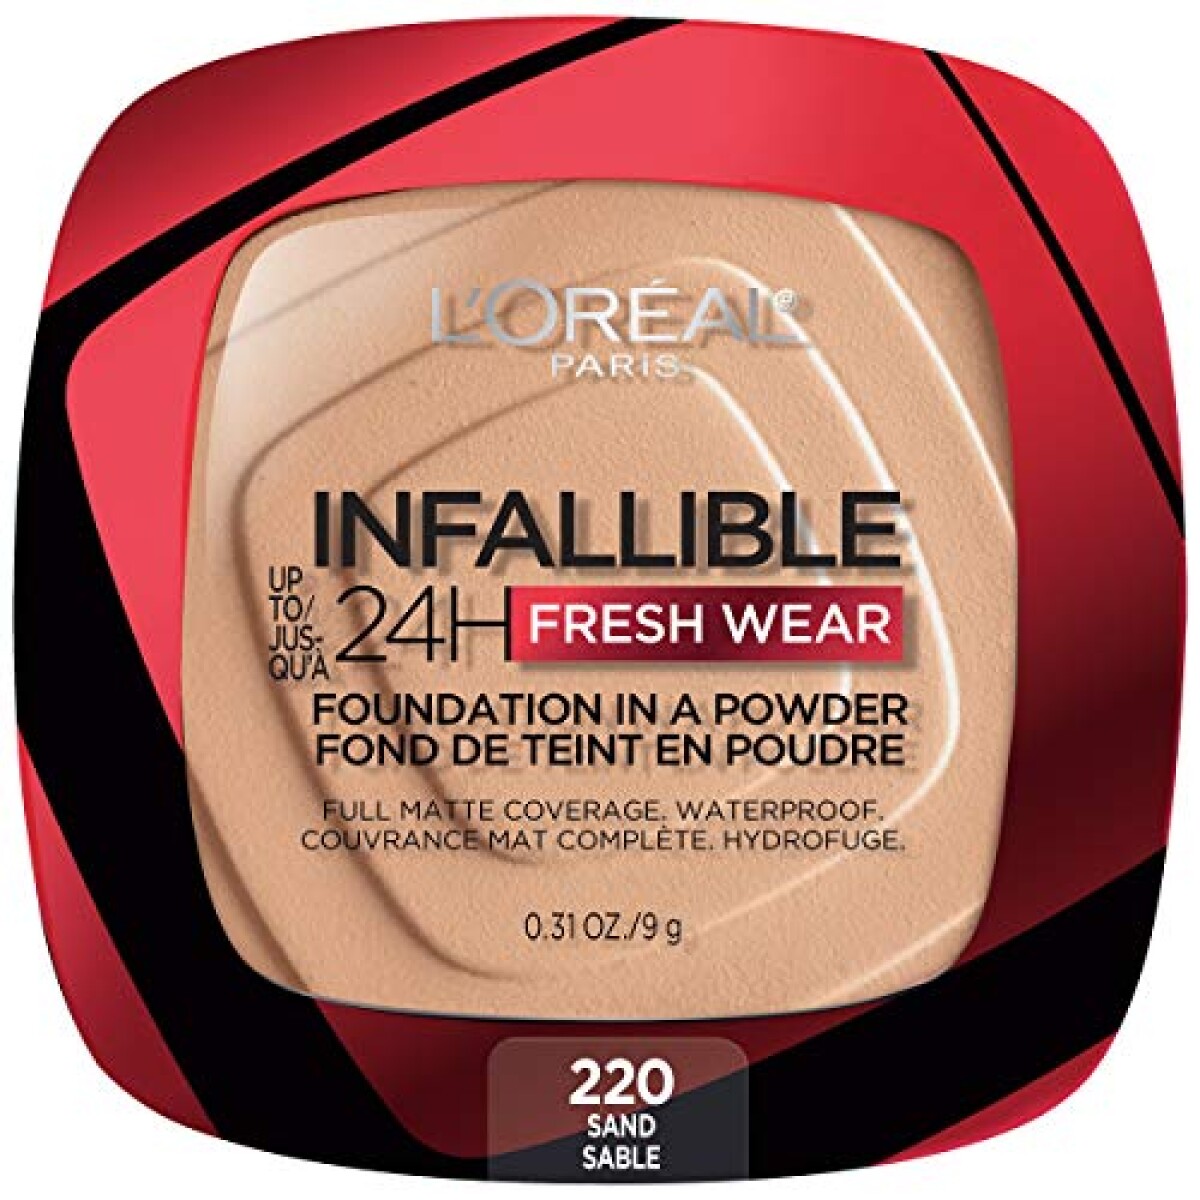 L'Oreal Paris Infallible Up to 24H Fresh Wear Foundation in a Powder 220 